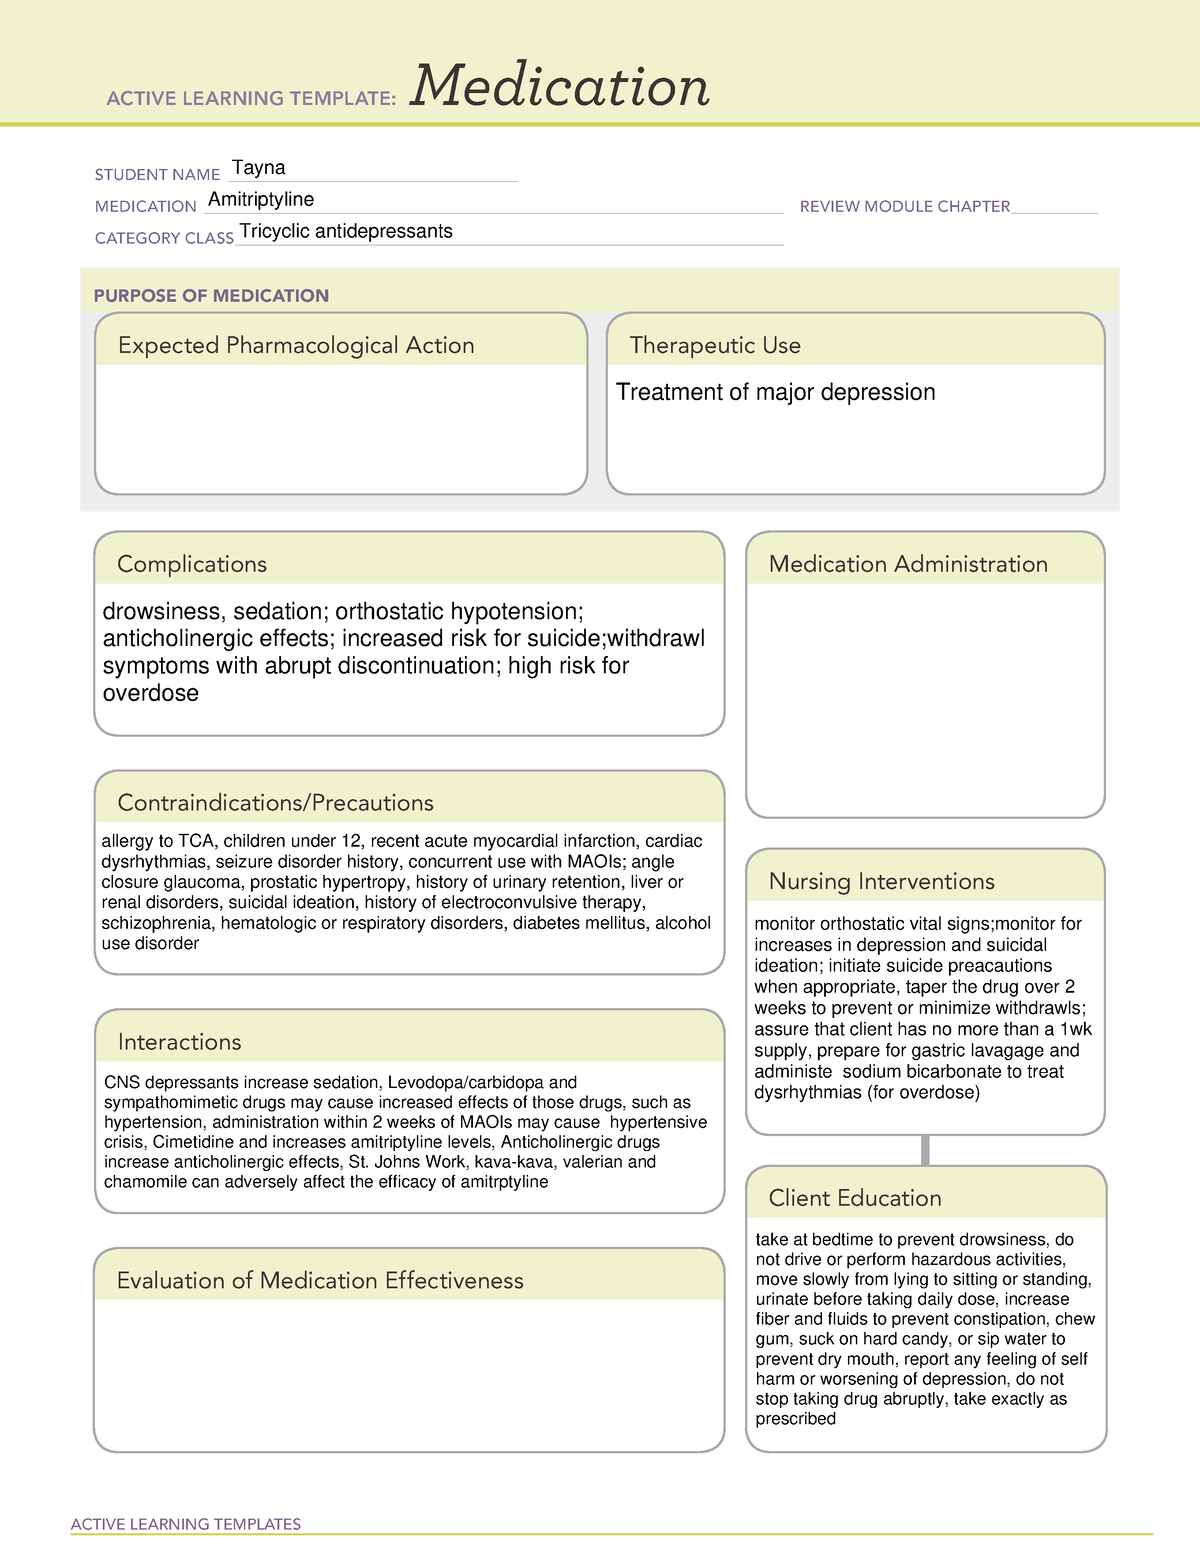 Amitriptyline Med Card ACTIVE LEARNING TEMPLATES Medication STUDENT